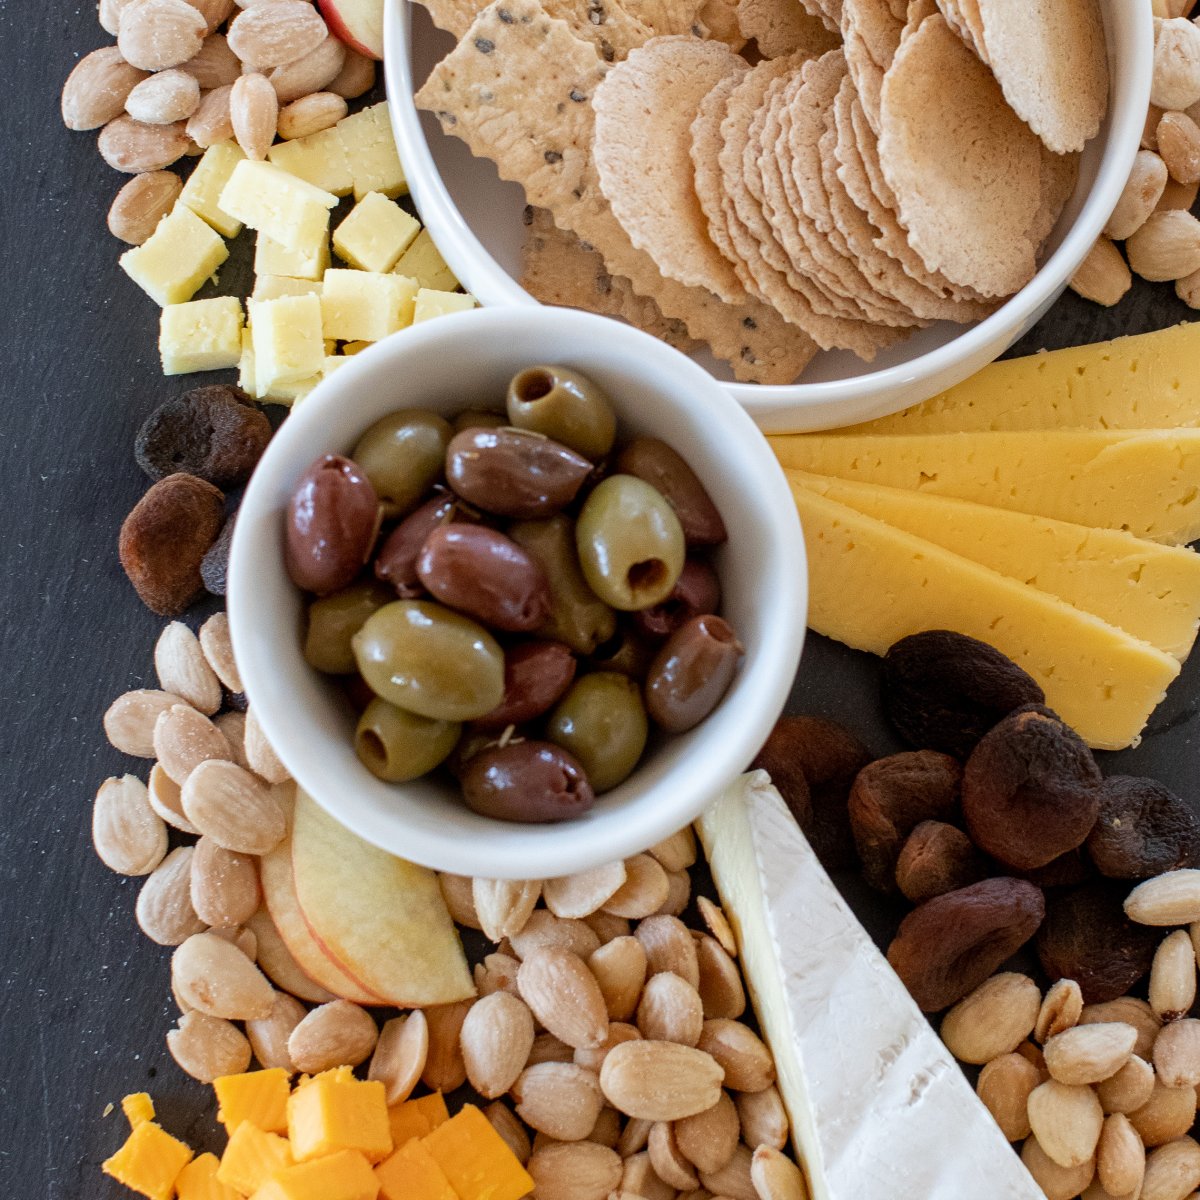 Platter of Nuts, Olives, Cheese and Bread